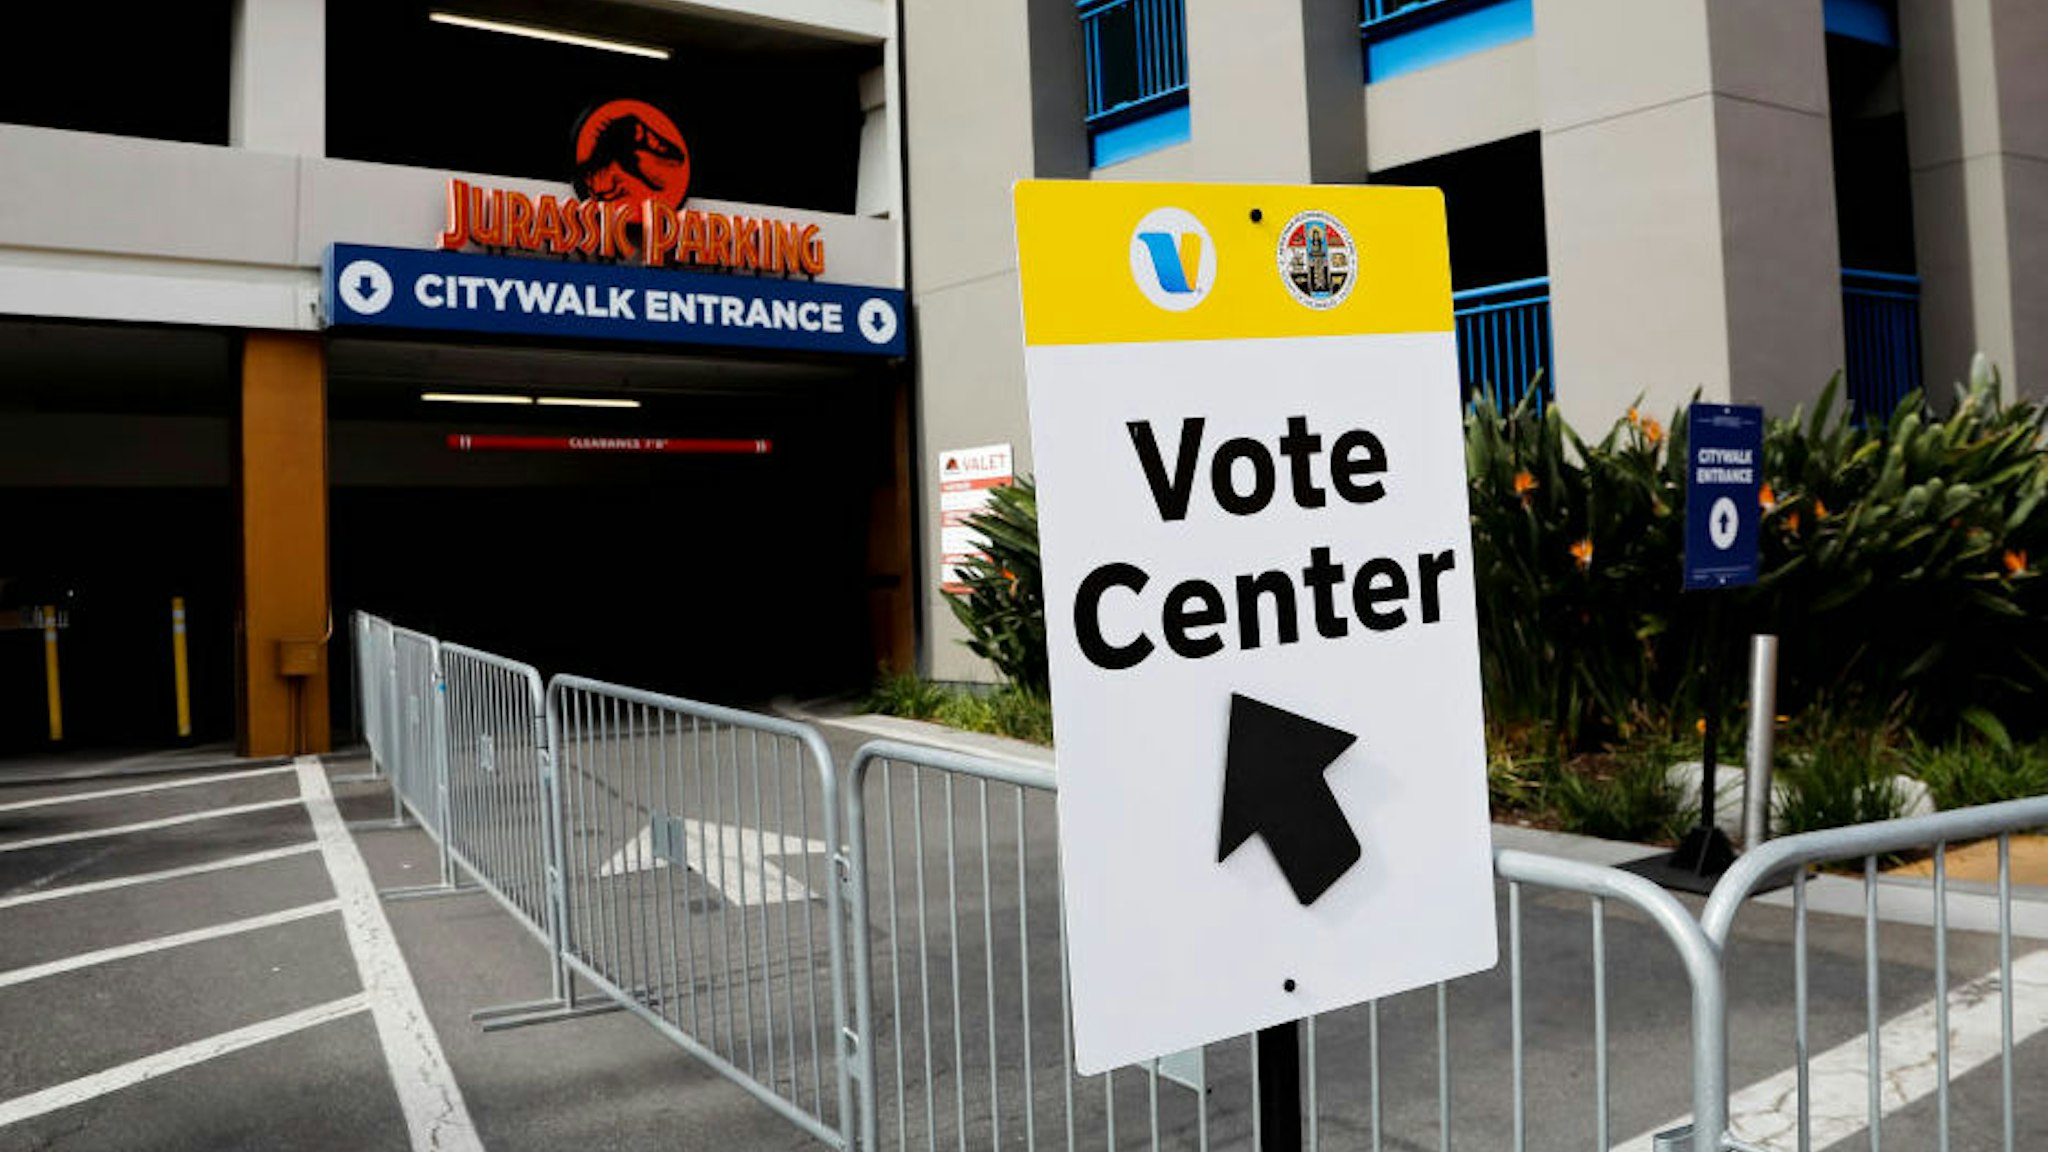 A view outside a voting center at the Jurassic Park parking garage at Universal Studios CityWalk on November 03, 2020 in Los Angeles, California. Several iconic Los Angeles landmarks that were temporarily closed due to the coronavirus (COVID-19) pandemic began operating as voting centers throughout the county on Friday. (Photo by Tibrina Hobson/Getty Images)